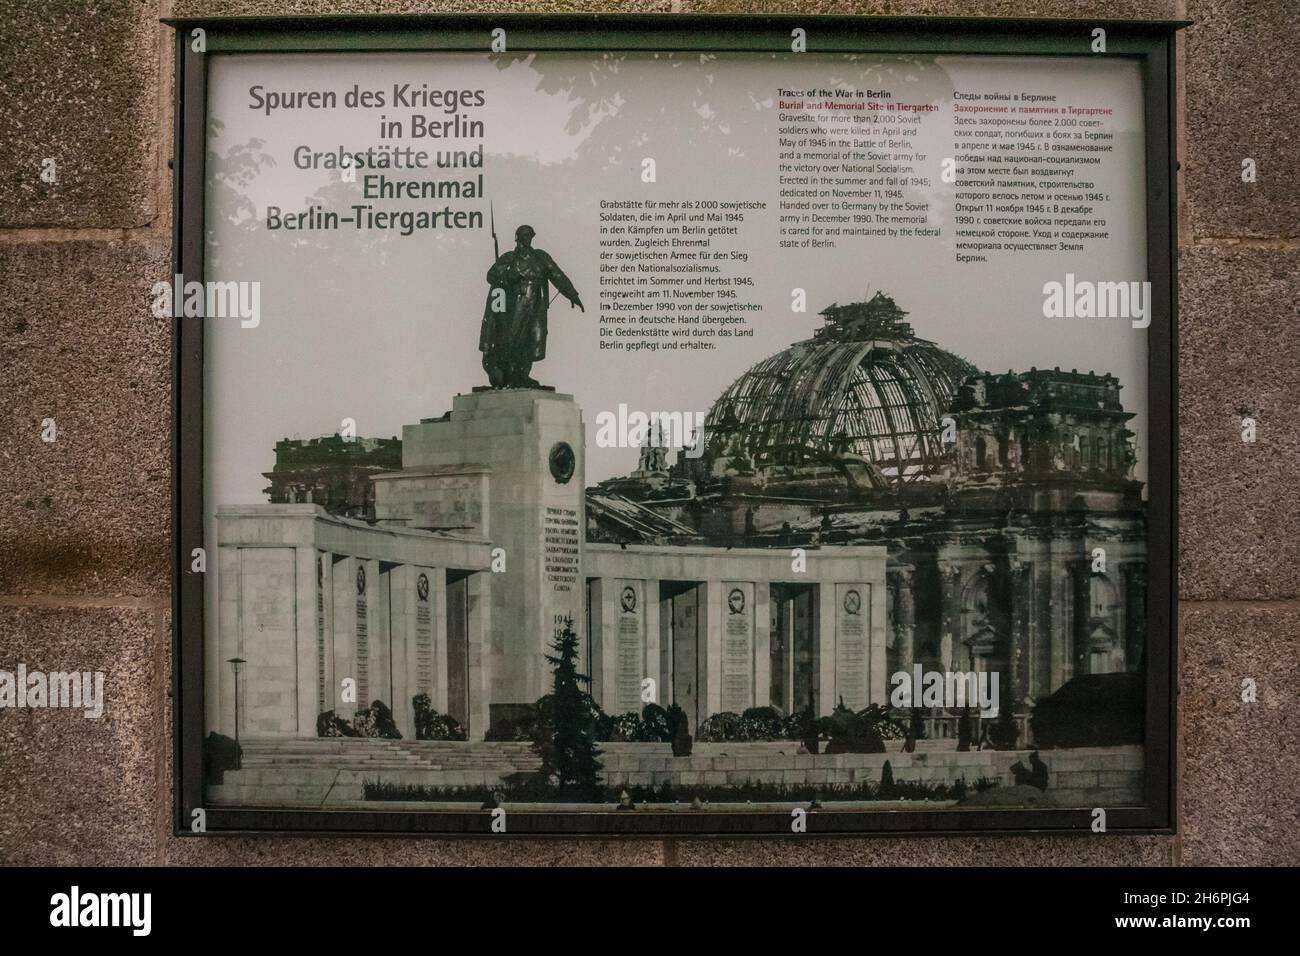 Close-up of a historic marker at the Soviet War Memorial in the park Tiergarten in Berlin, showing a photograph of the Soviet memorial with the ruins... Stock Photo